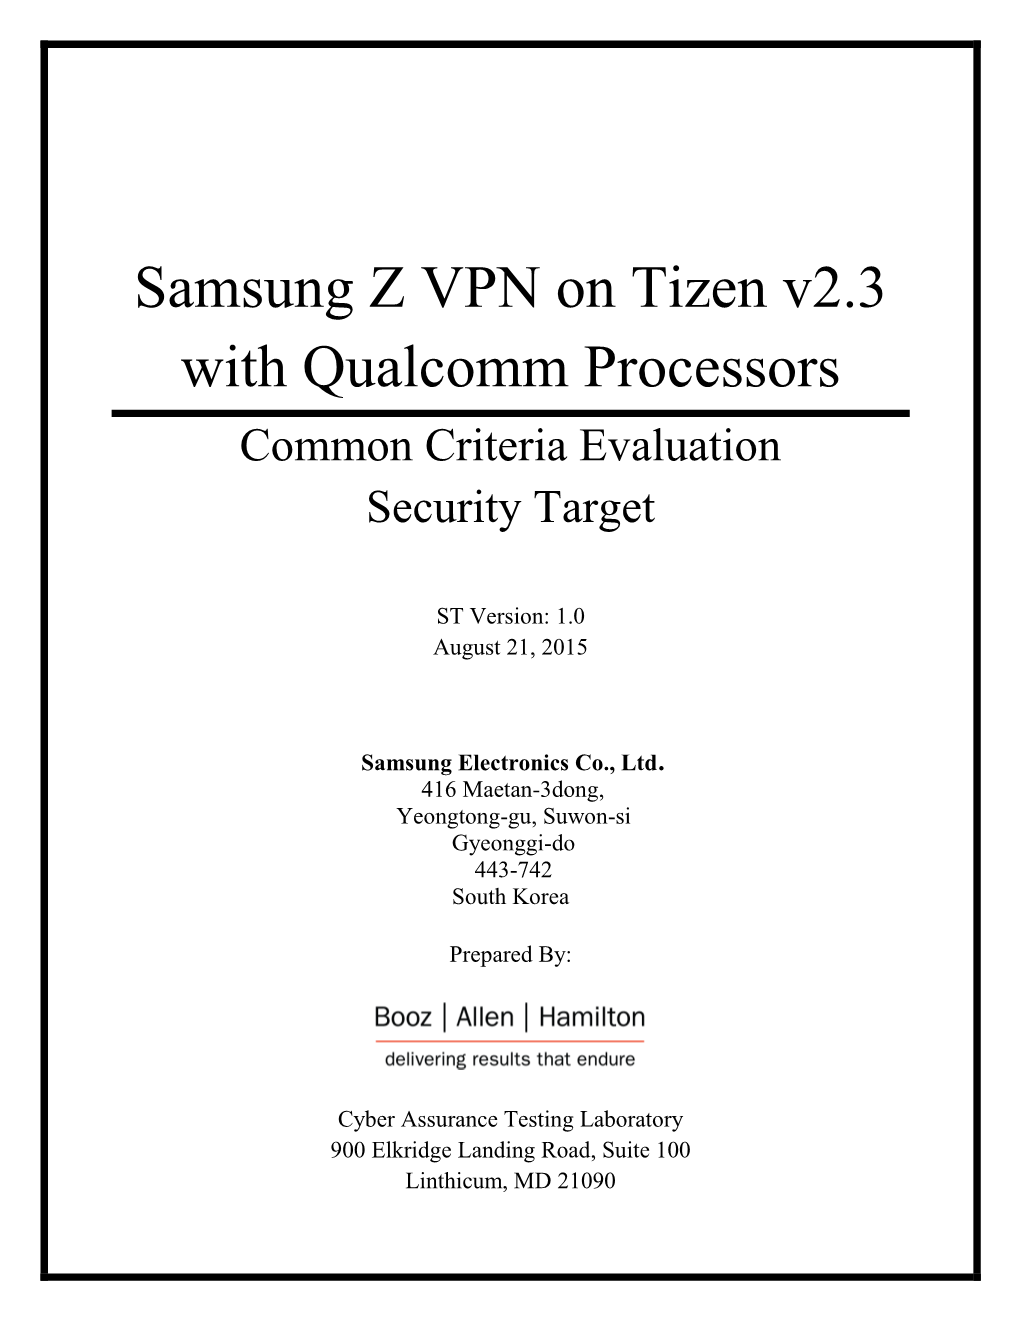 Samsung Z VPN on Tizen V2.3 with Qualcomm Processors Common Criteria Evaluation Security Target